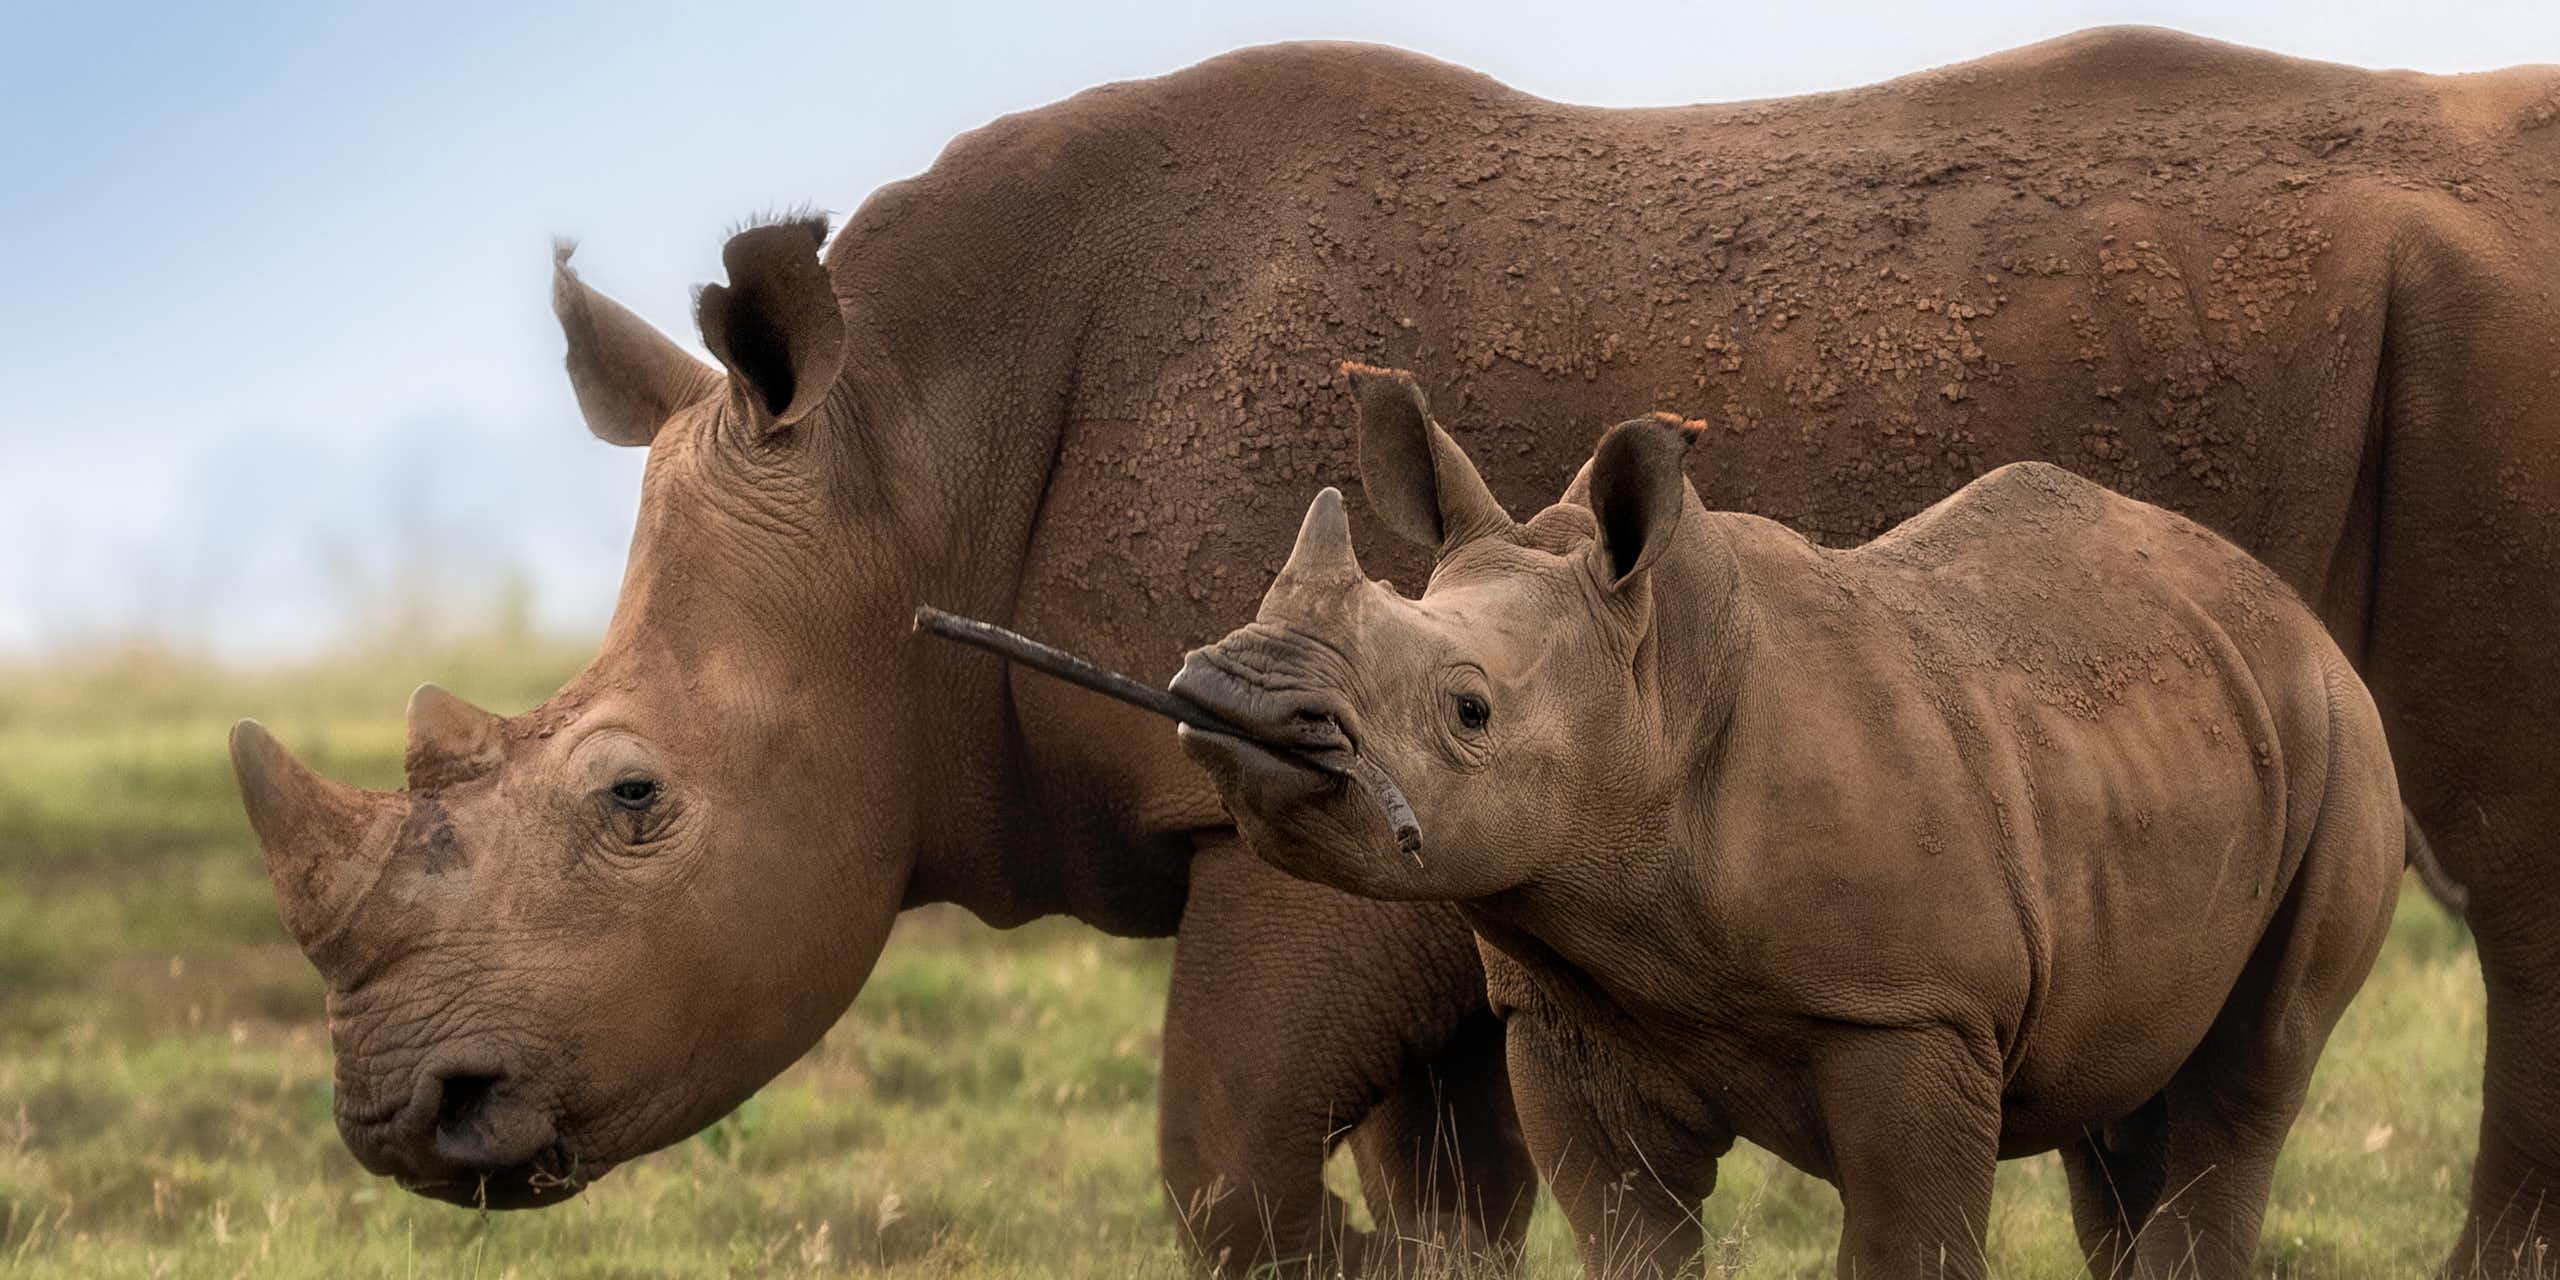 A parent and baby rhino stand in the wild with their horns on full display. The baby is carrying a stick in its mouth.